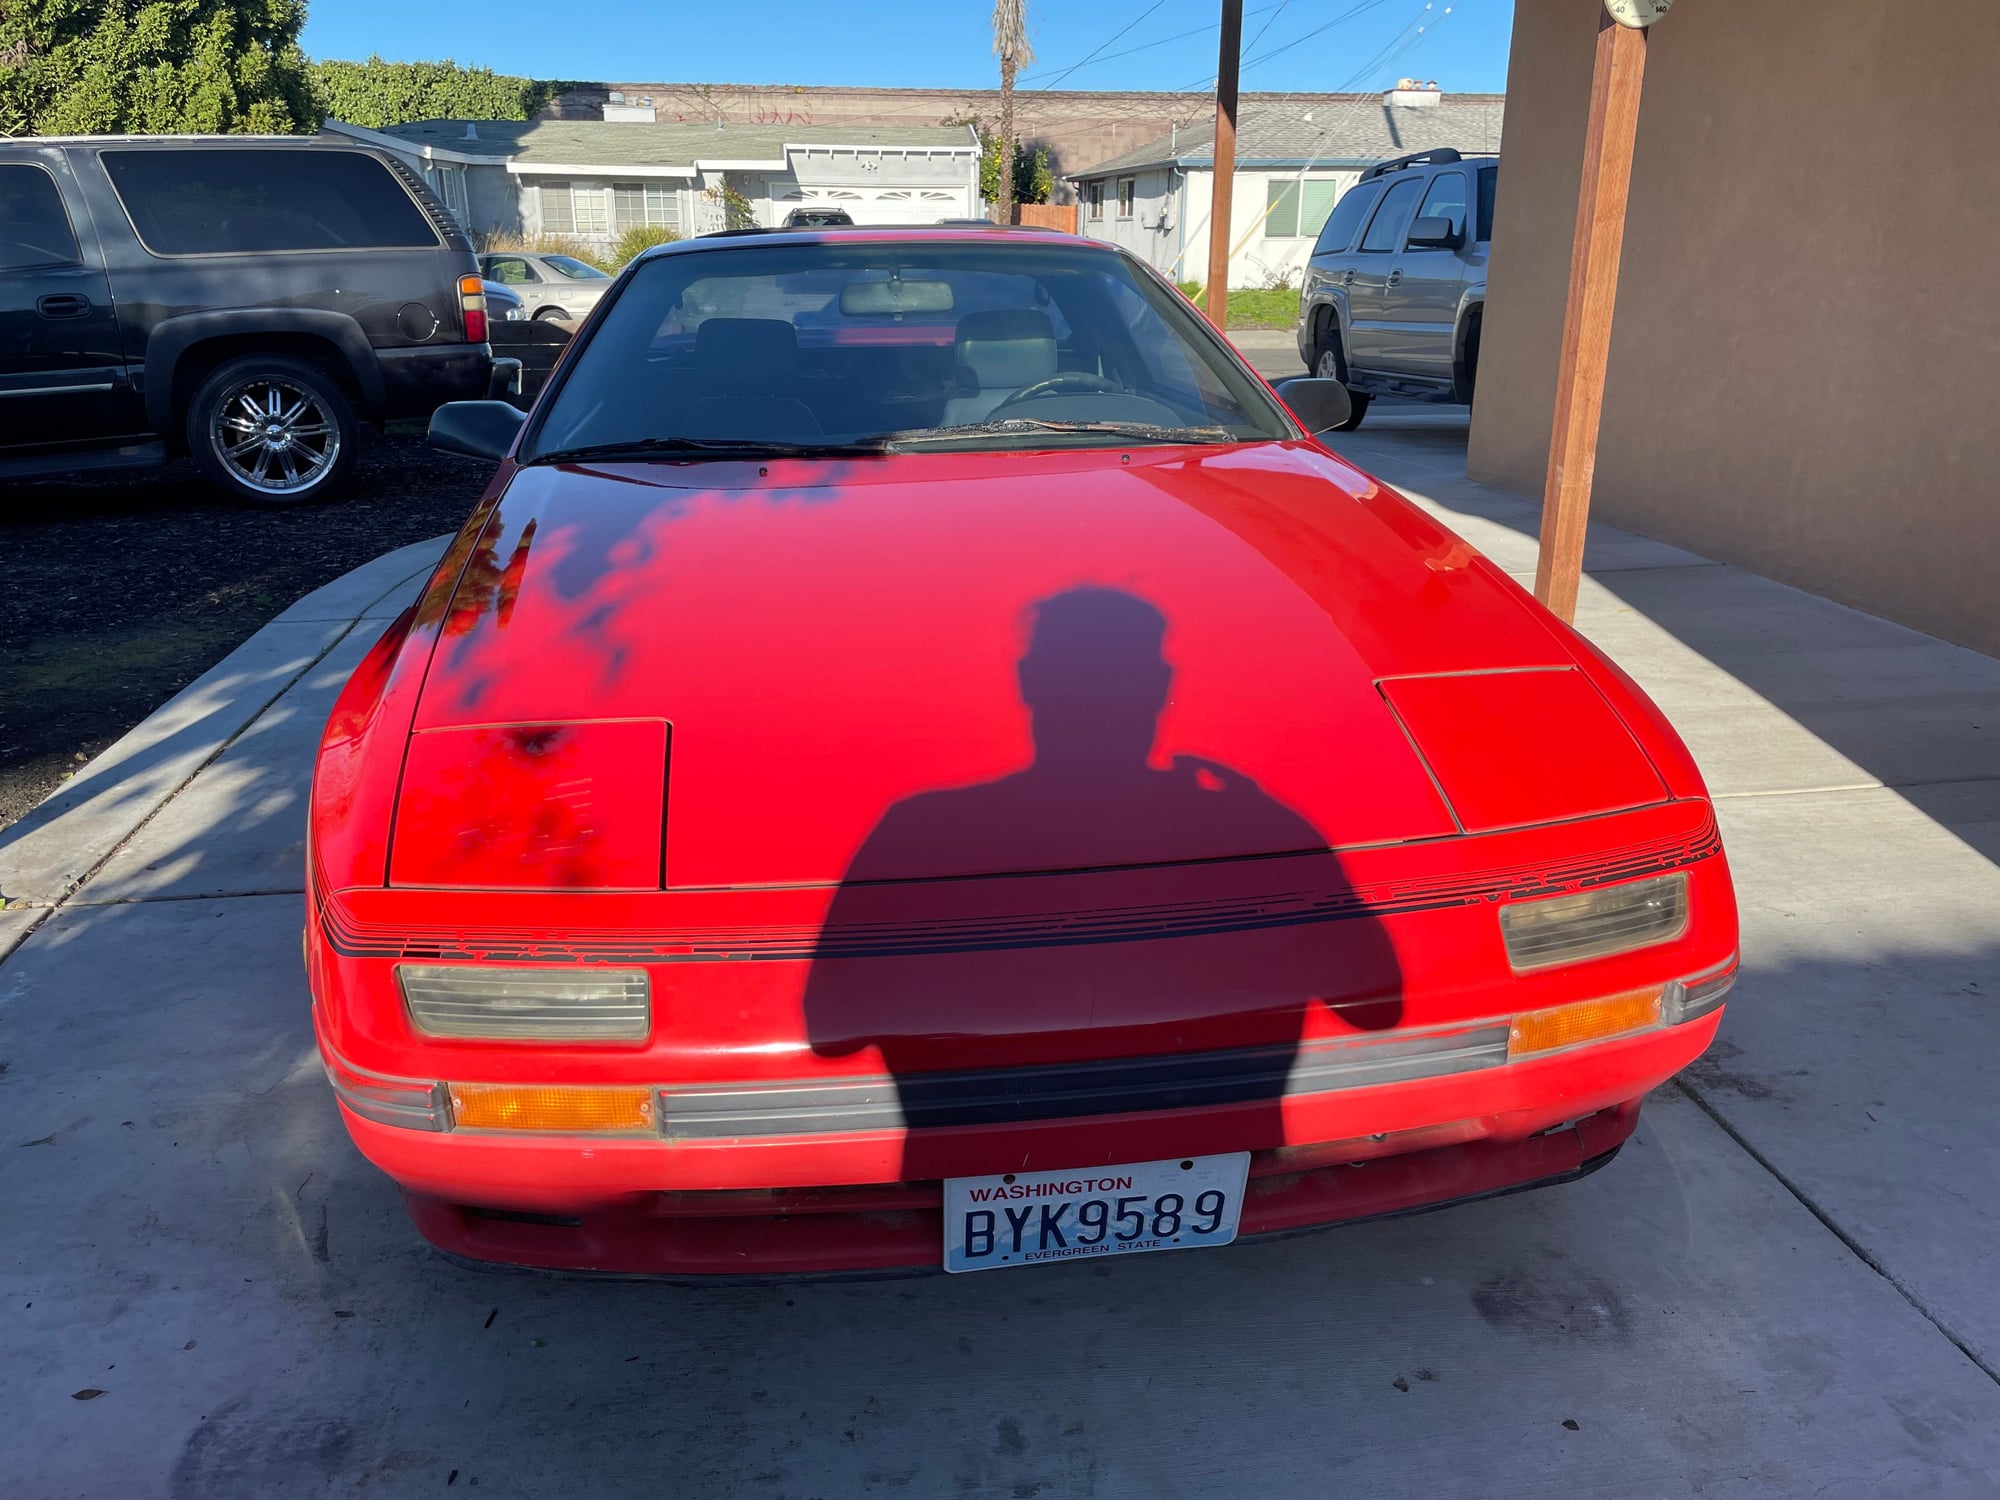 1986 Mazda RX-7 - 1986 Mazda Rx-7 GXL Clean Title - Used - VIN JM1FC3310G0102299 - 143,000 Miles - Other - 2WD - Manual - Coupe - Red - San Leandro, CA 94579, United States